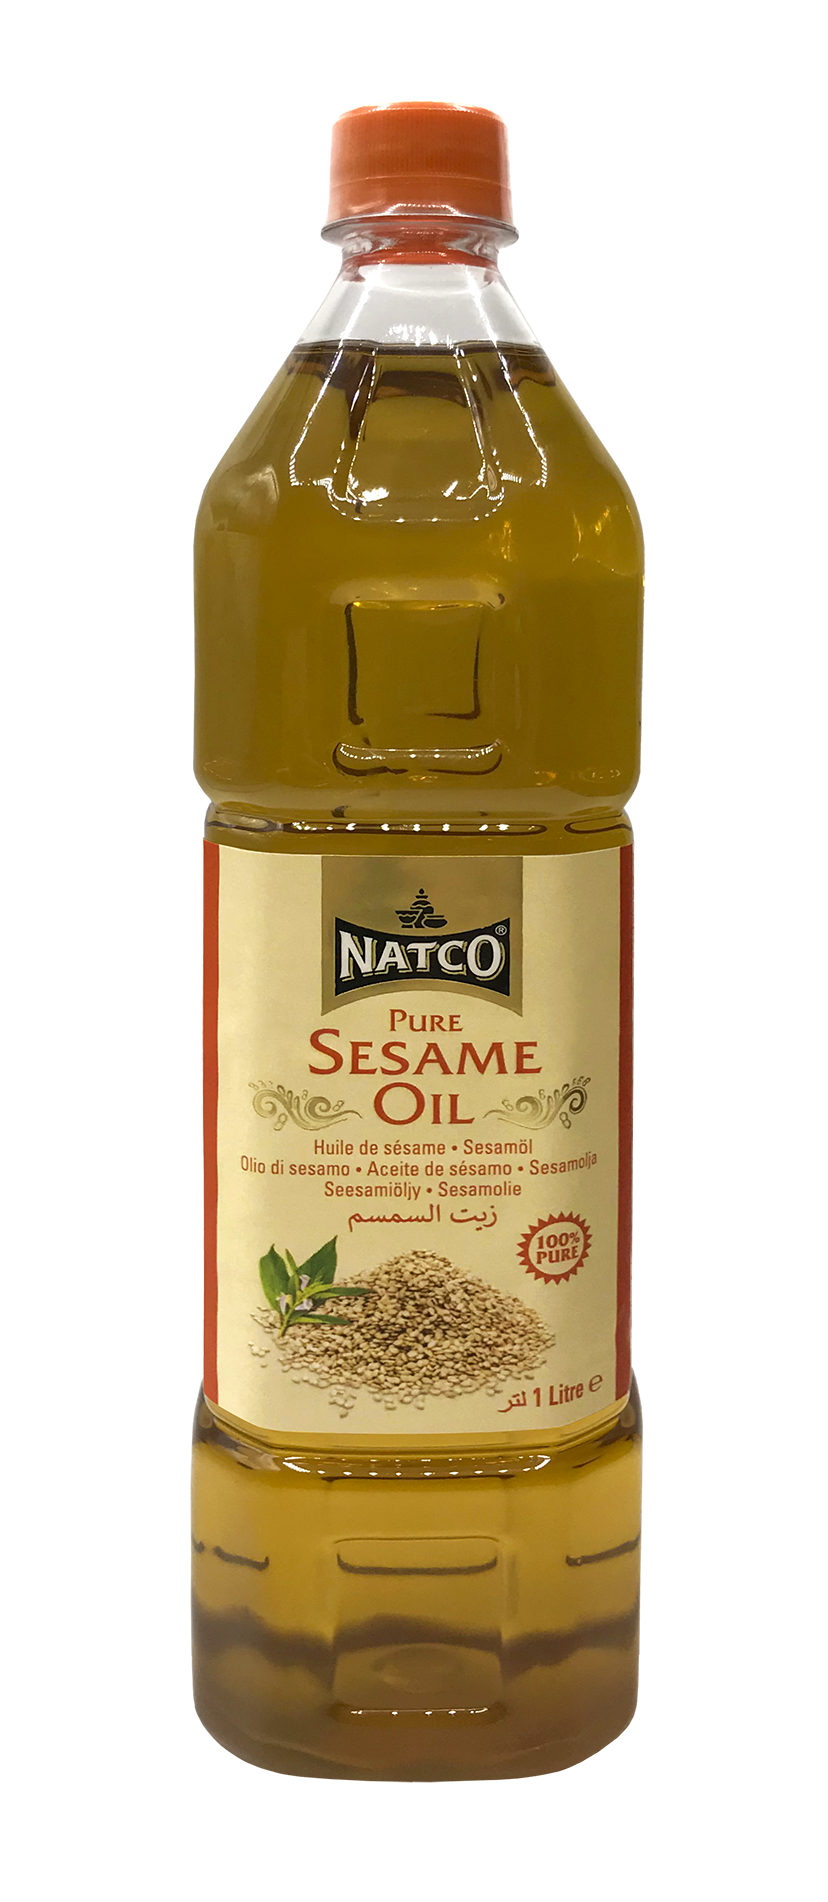 Sesame Oil - Everything You Need to Know